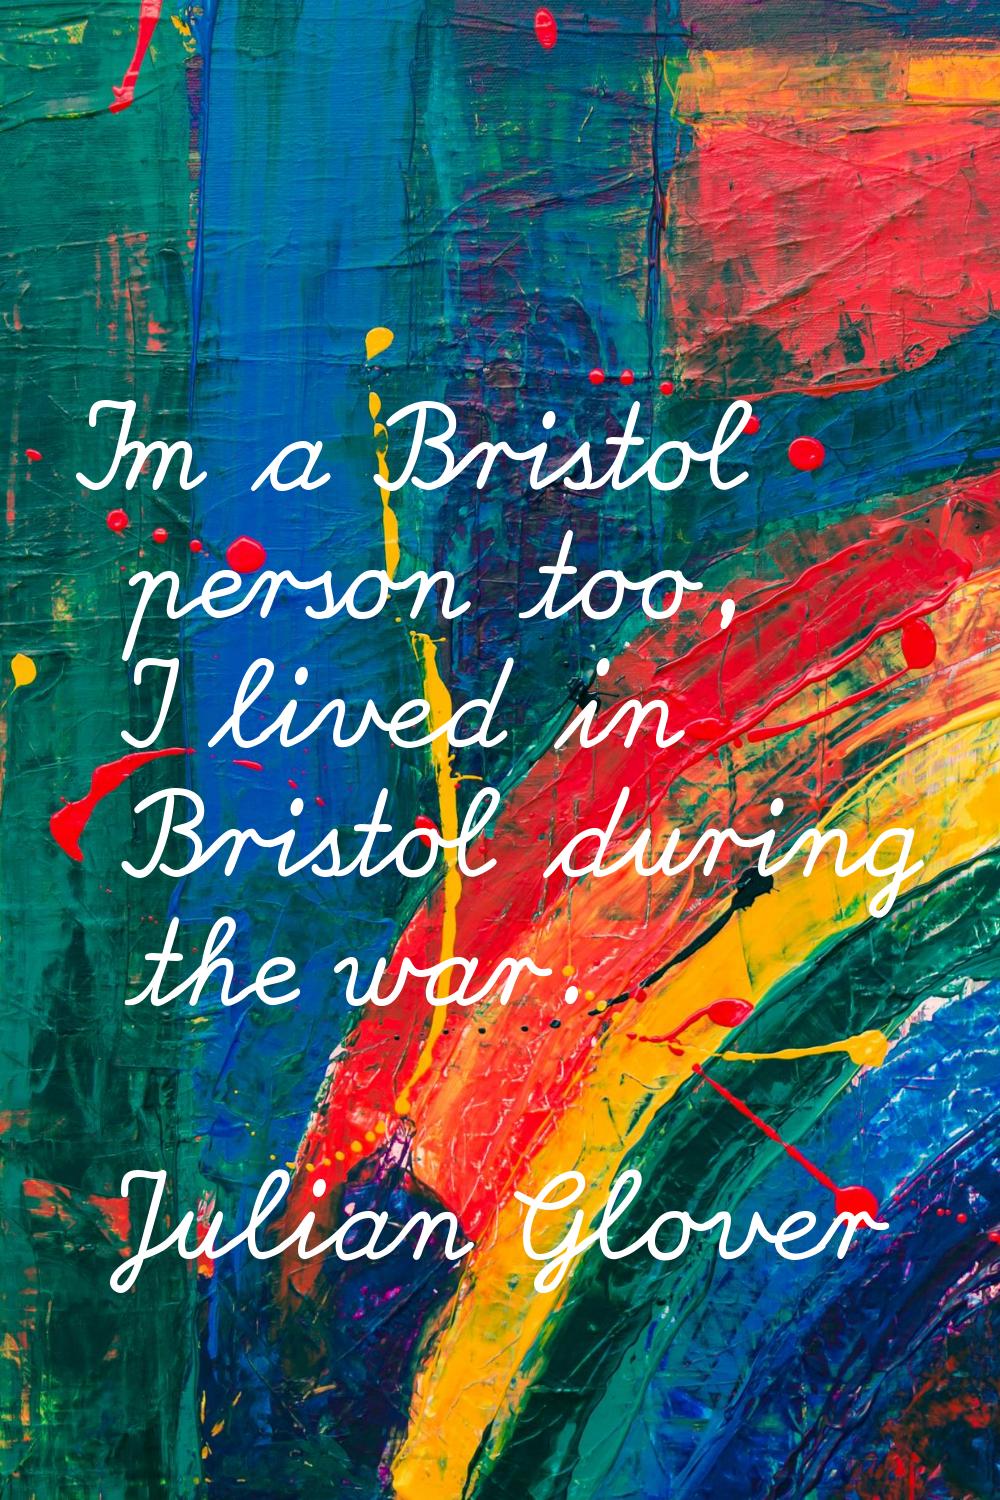 I'm a Bristol person too, I lived in Bristol during the war.